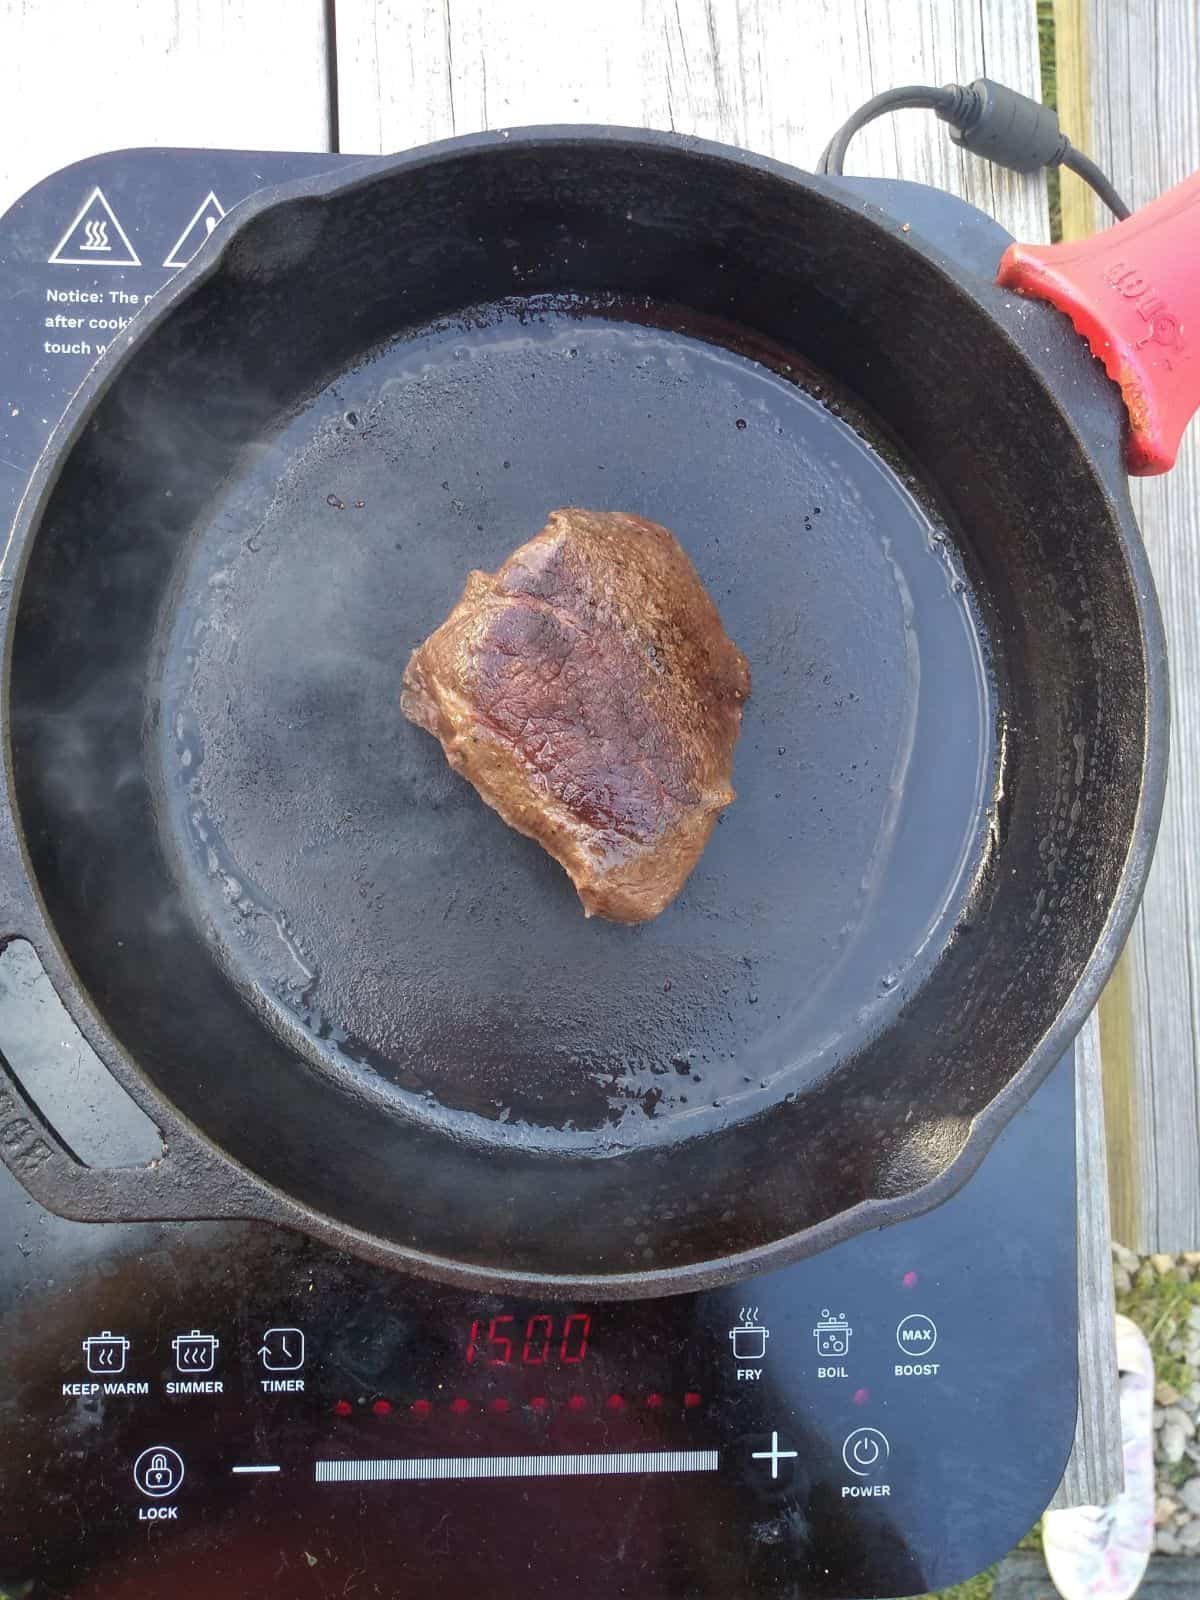 A sirloin filet steak in an oiled cast iron pan on top of an induction cooktop